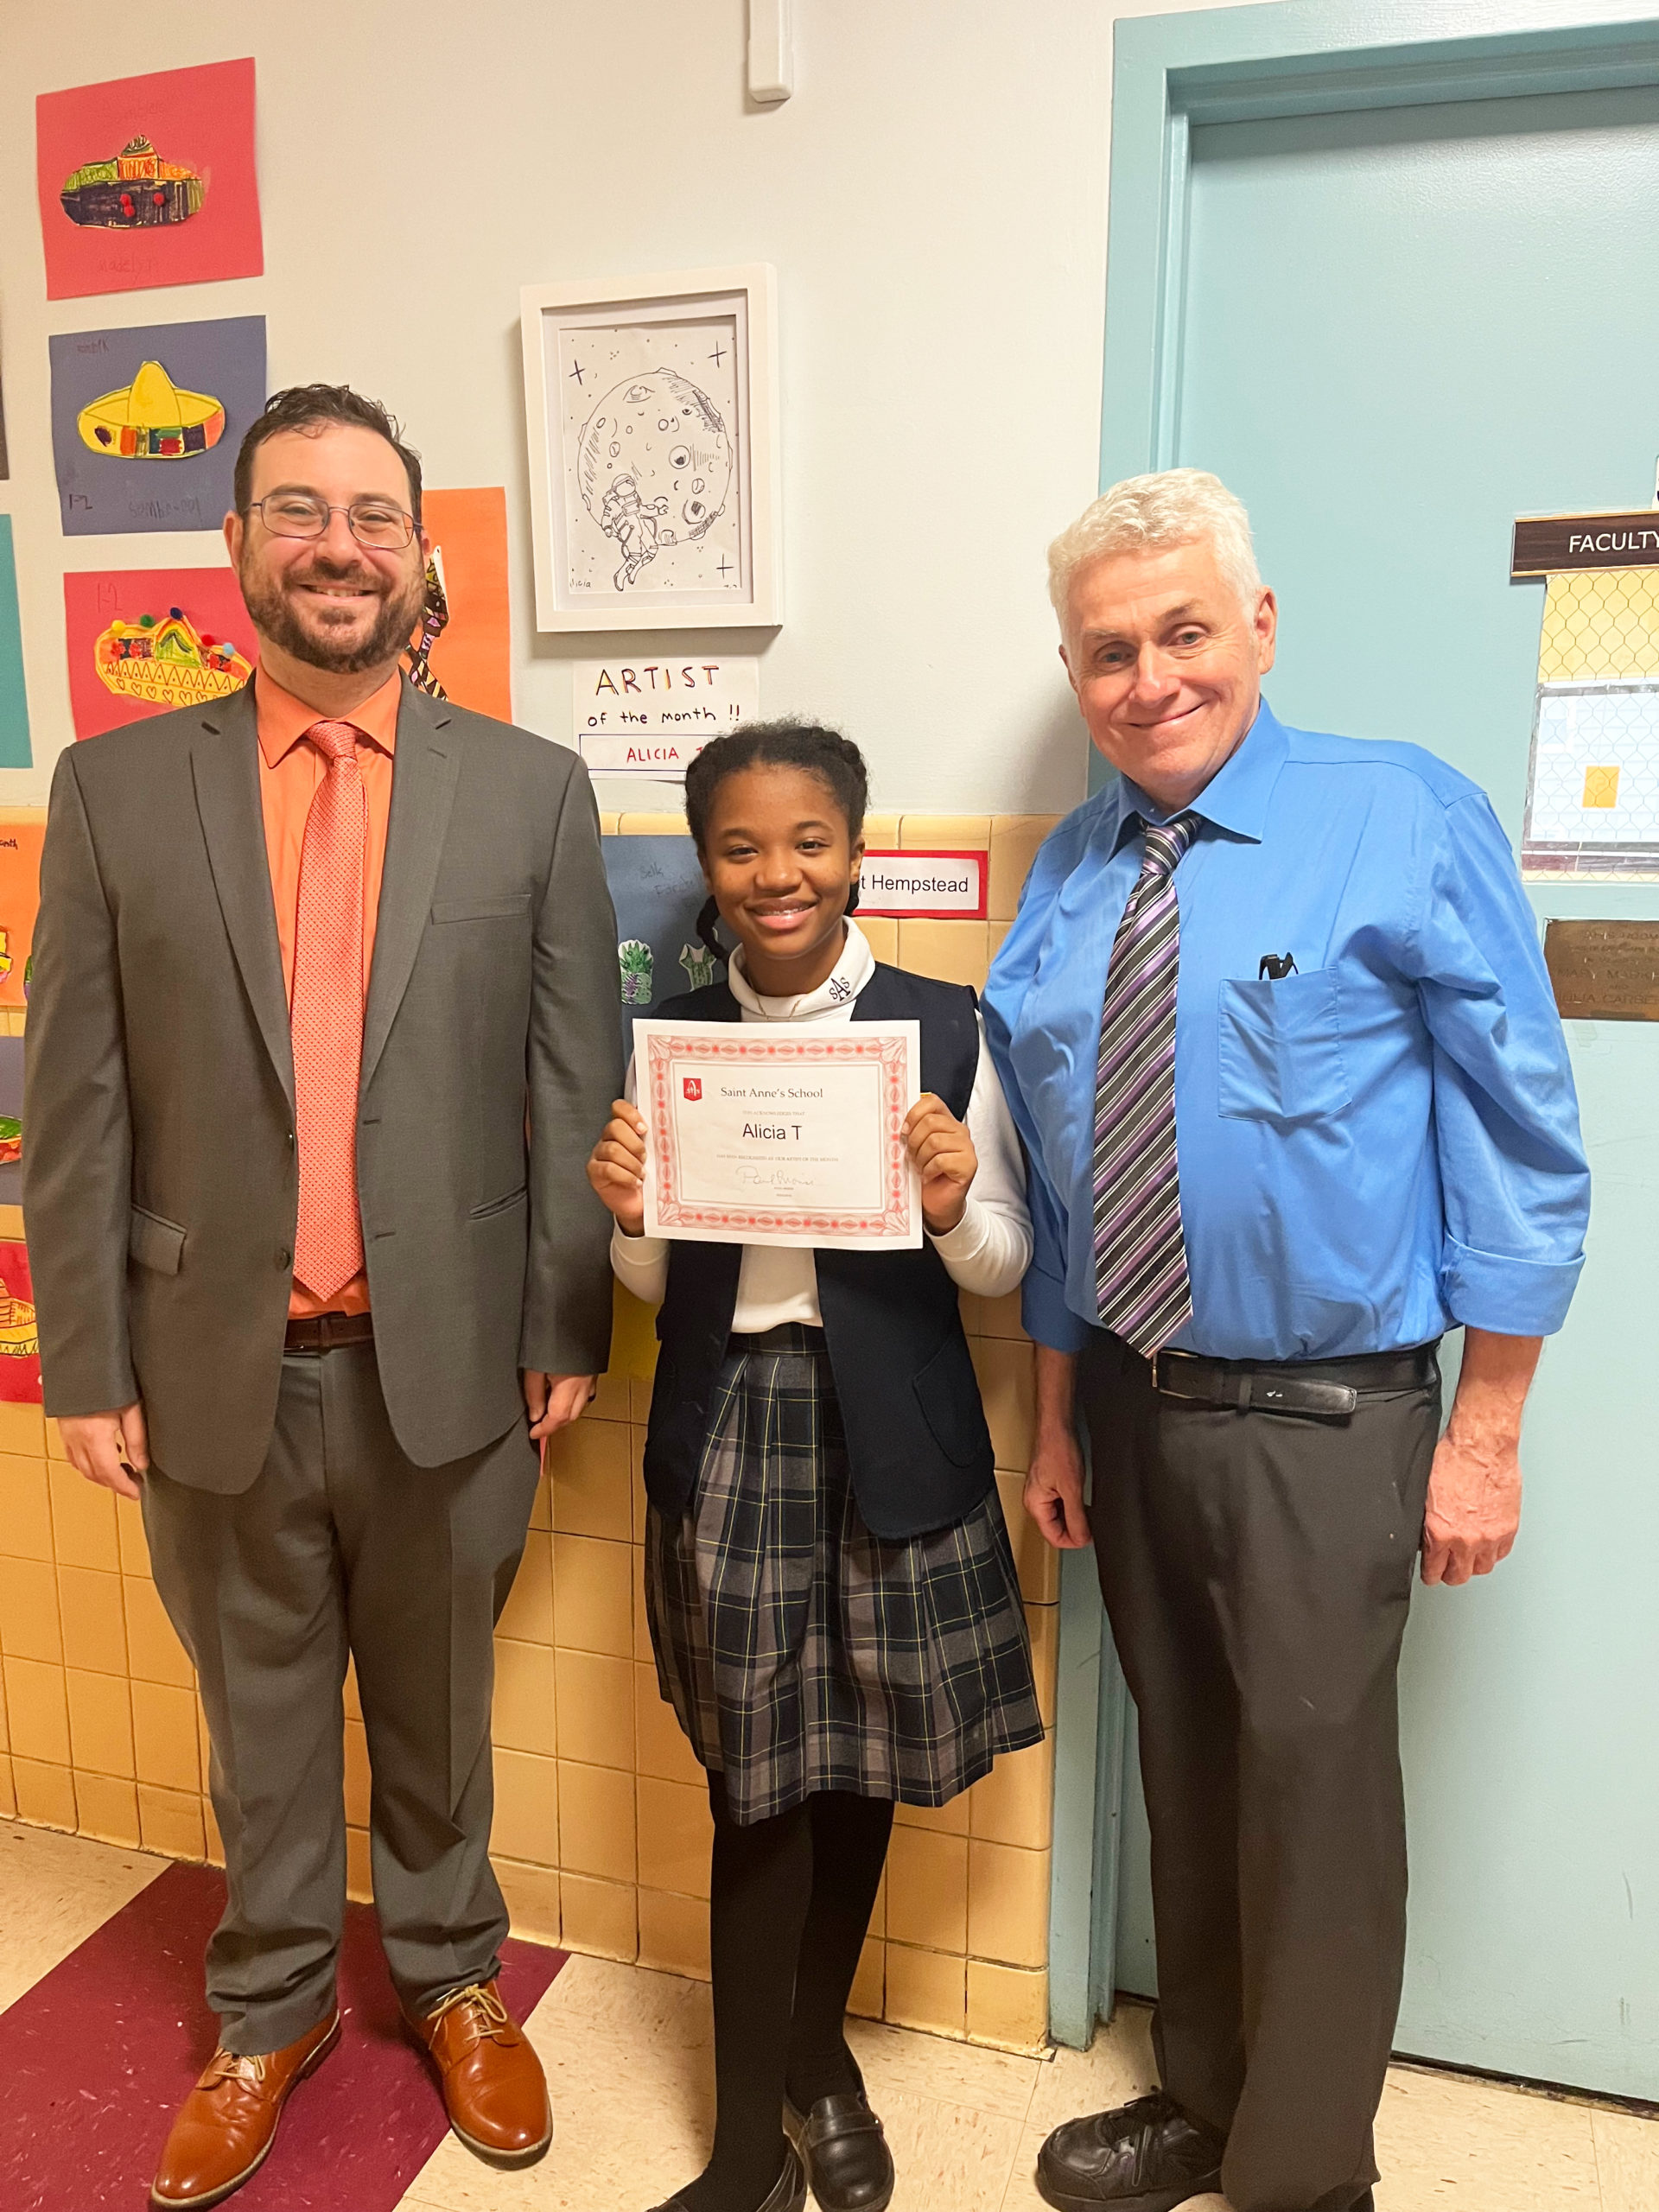 Principal Paul Morisi (left) with Alicia T. (center) and Art teacher Mr. Carrol (right). Notice her art framed on the wall!